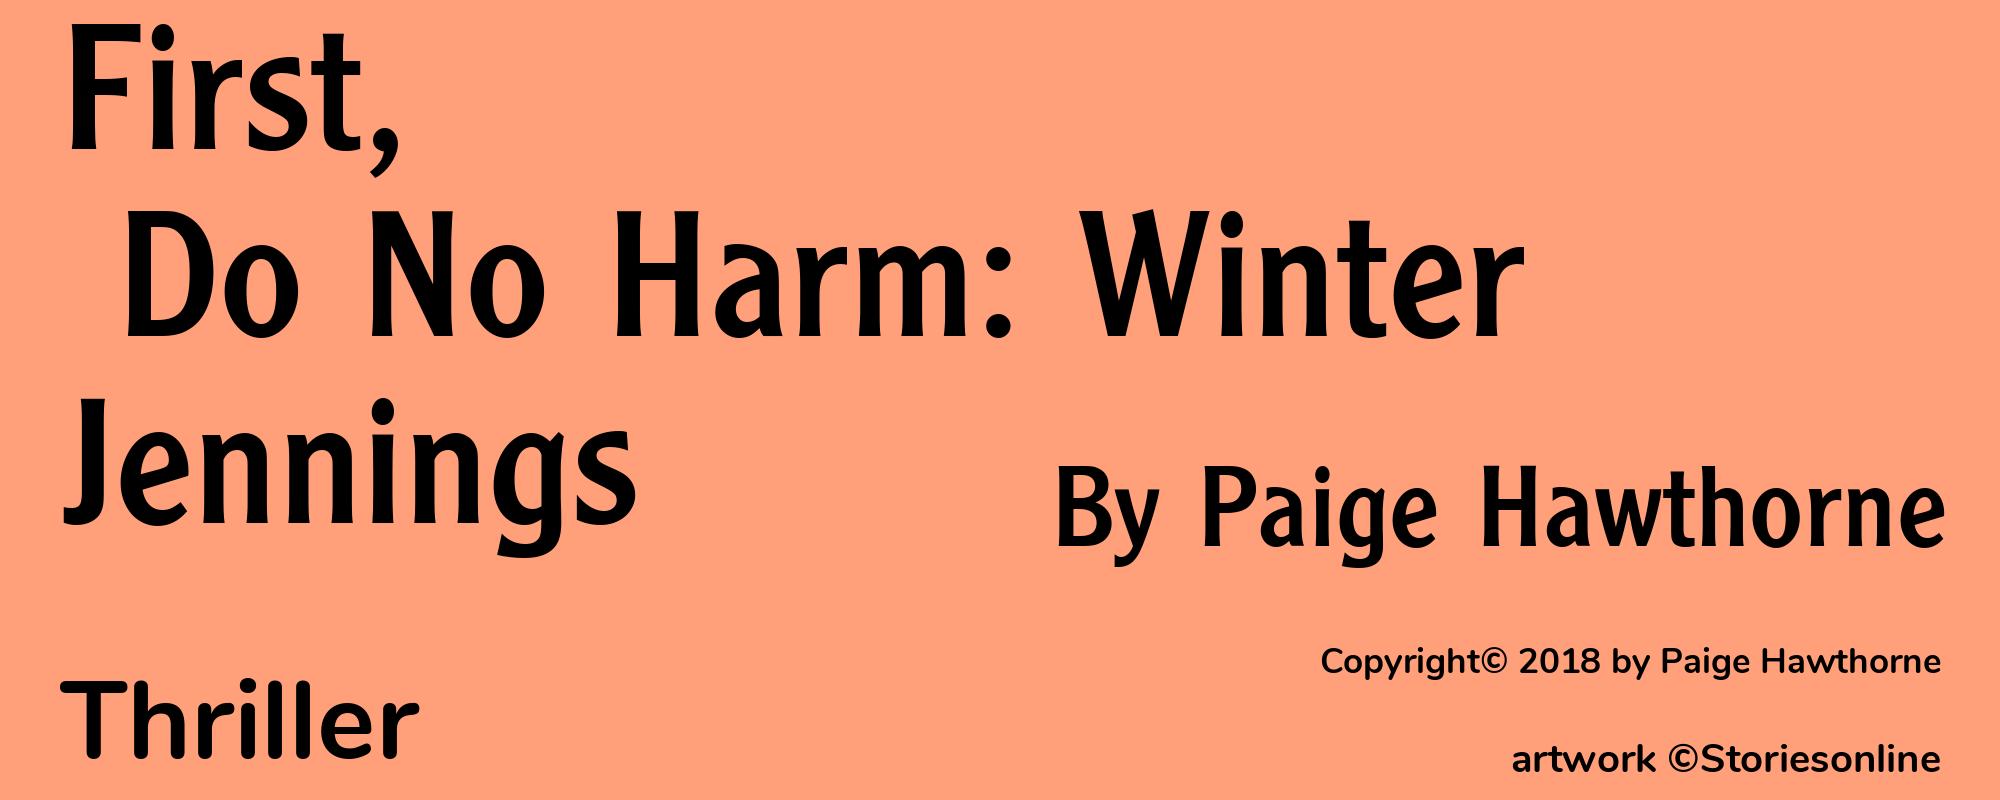 First, Do No Harm: Winter Jennings - Cover